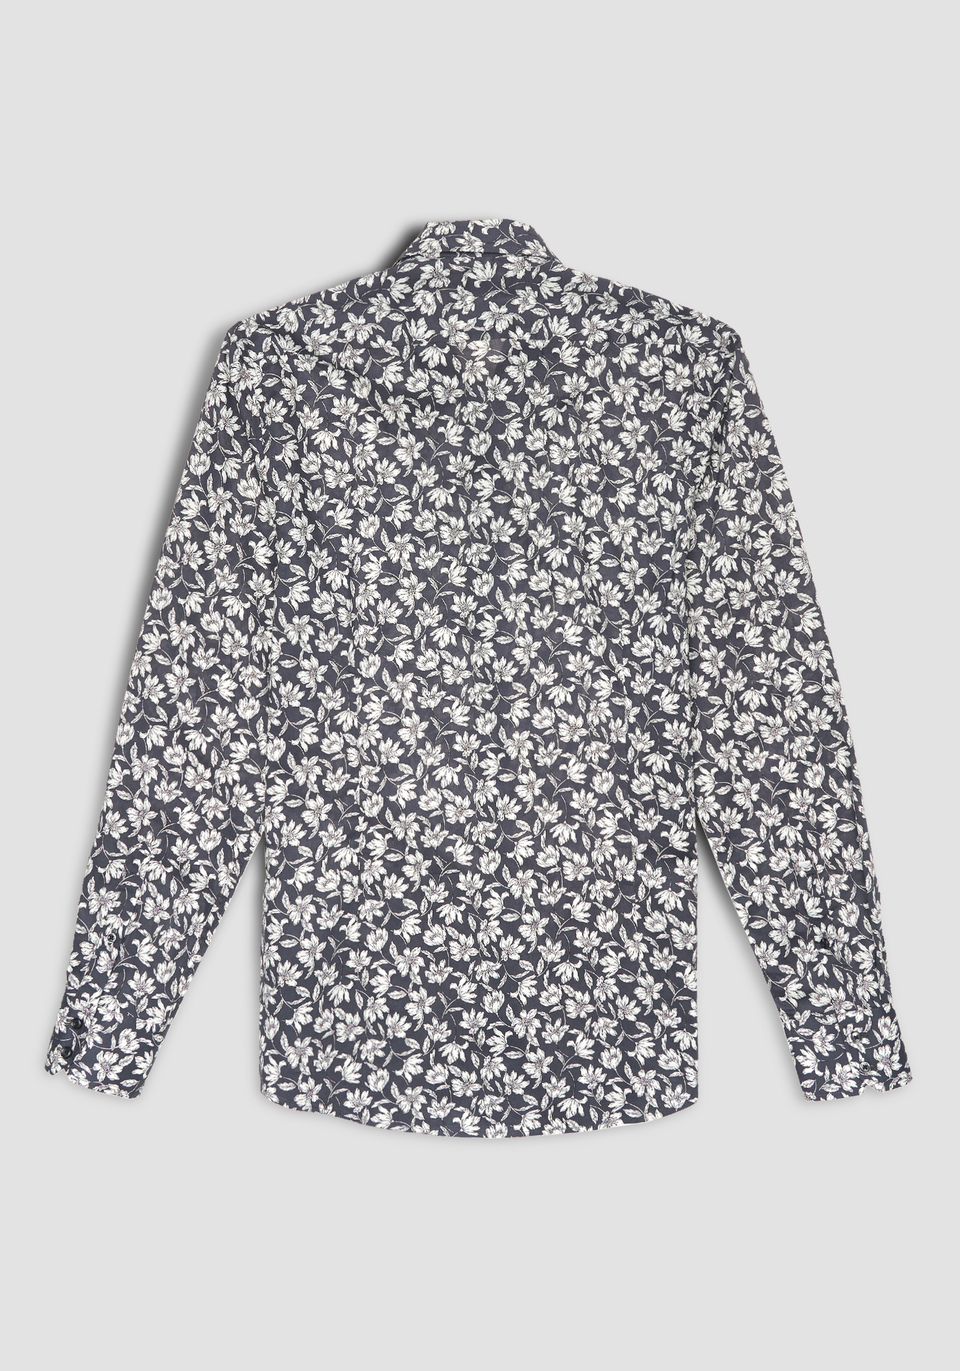 "NAPOLI" SLIM FIT SHIRT IN SOFT-TOUCH COTTON WITH FLORAL PRINT - Antony Morato Online Shop